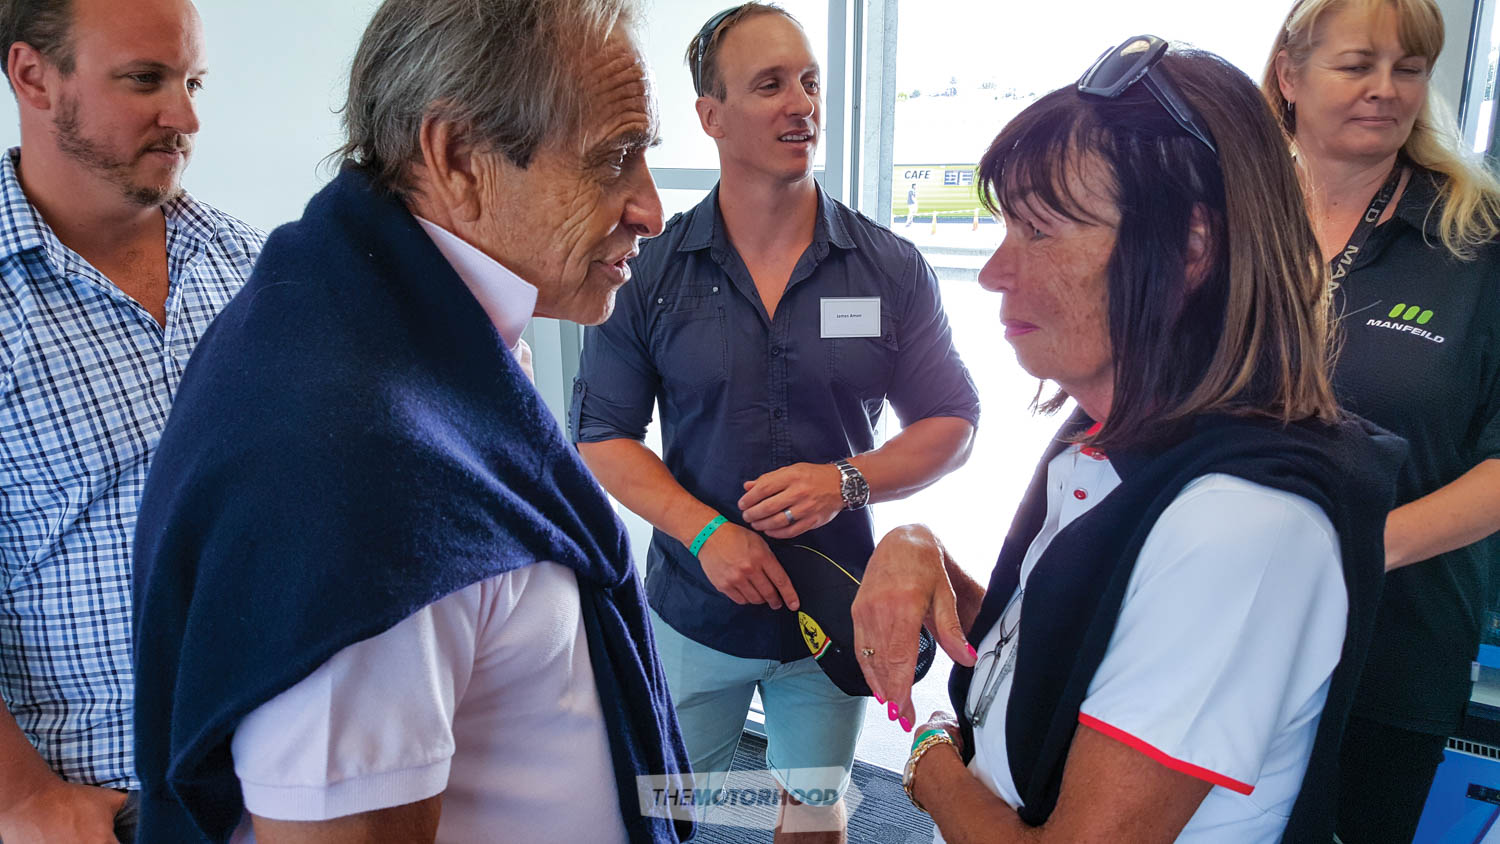 Jacky Ickx meets Tish Amon. In the background are Amon twins Alex and James and Manfeild CEO, Julie Keane